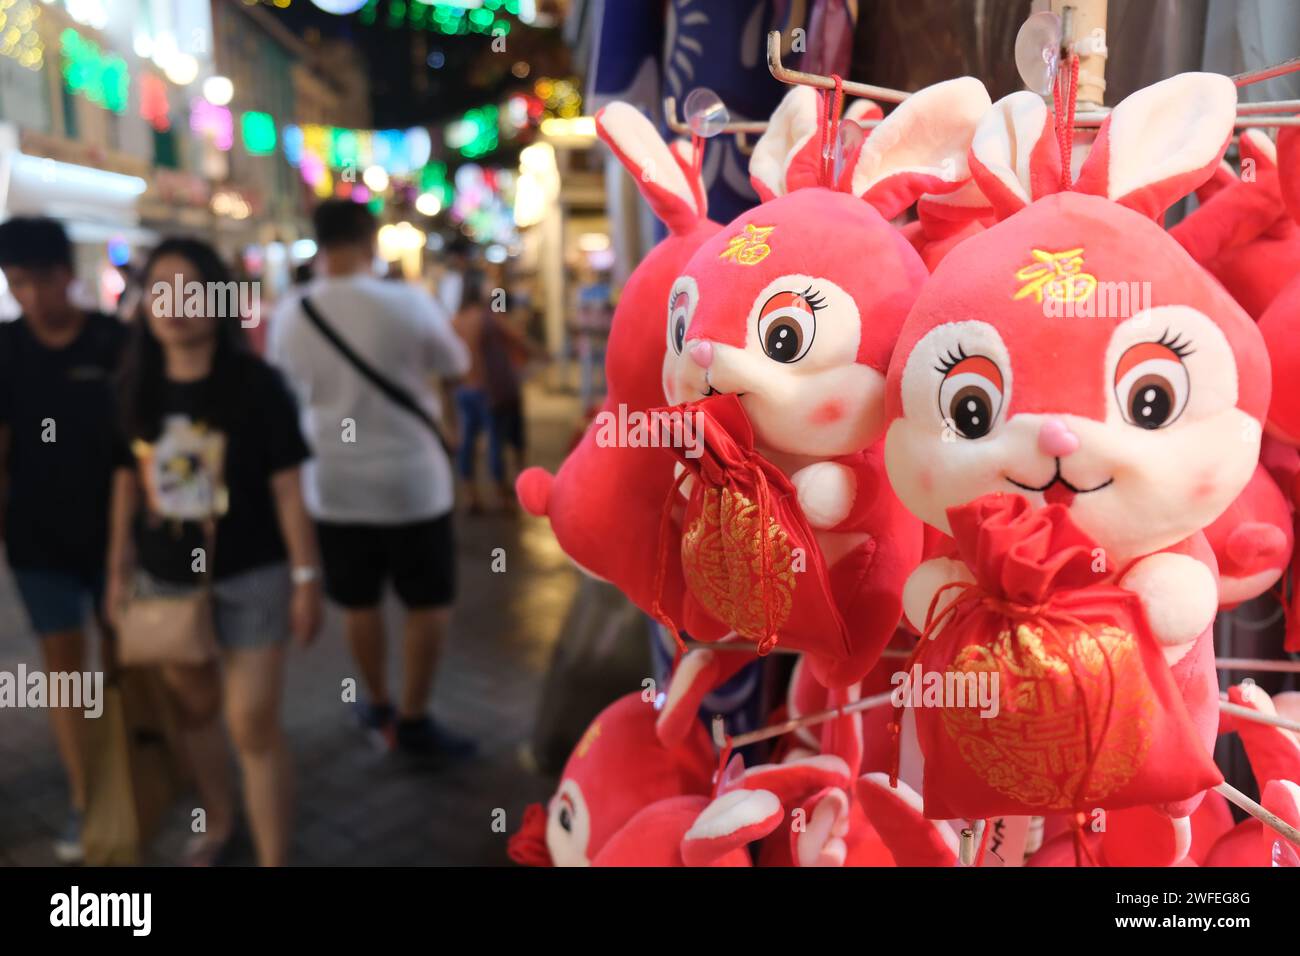 Stuffed toys marking the Year of the Rabbit on sale during 2023 lunar new year in Singapore's Chinatown Stock Photo